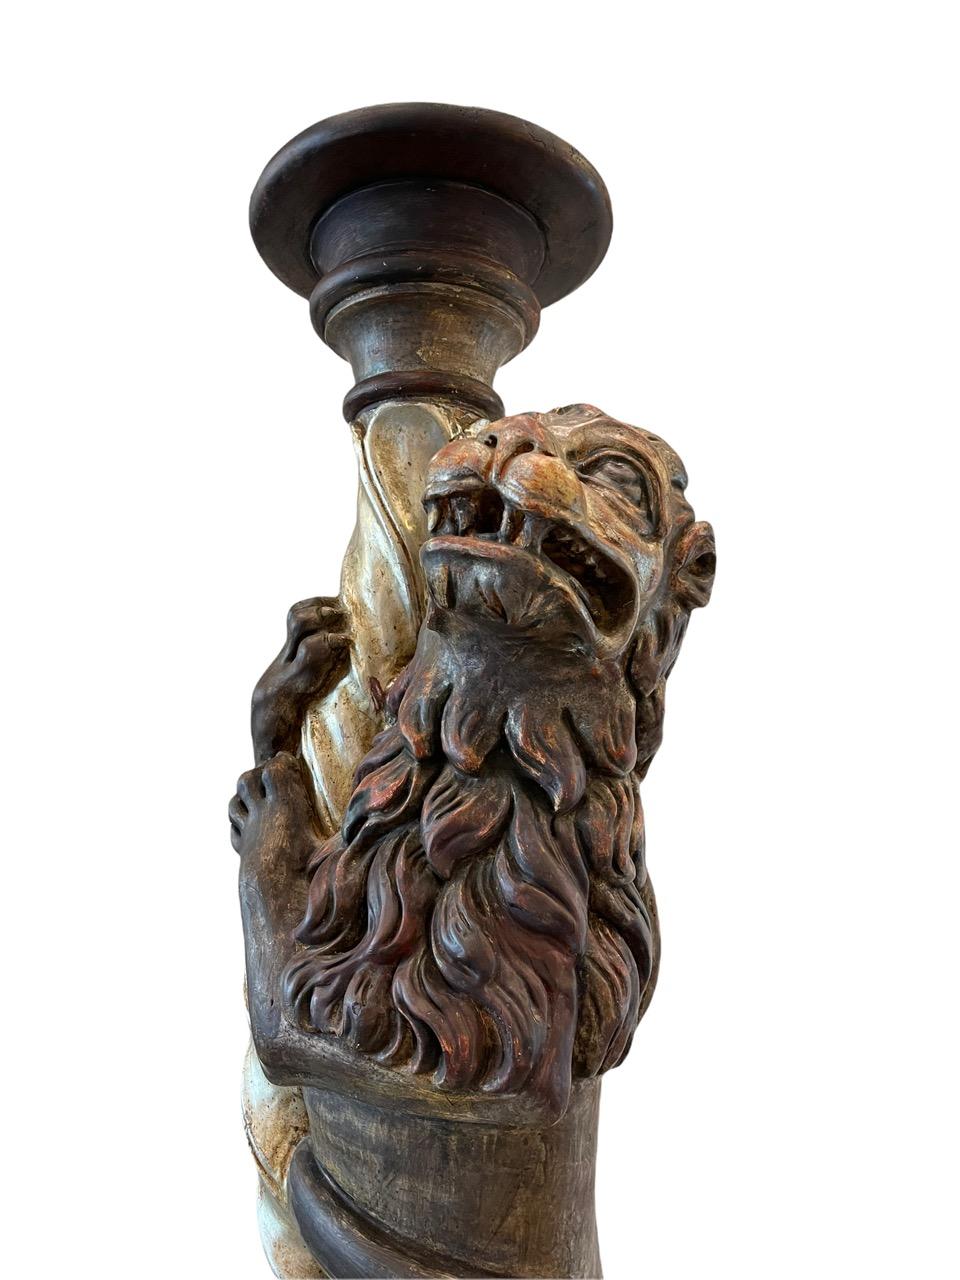 19th Century Russian Empire Carved Wood Candle Holder Sculpture For Sale 4